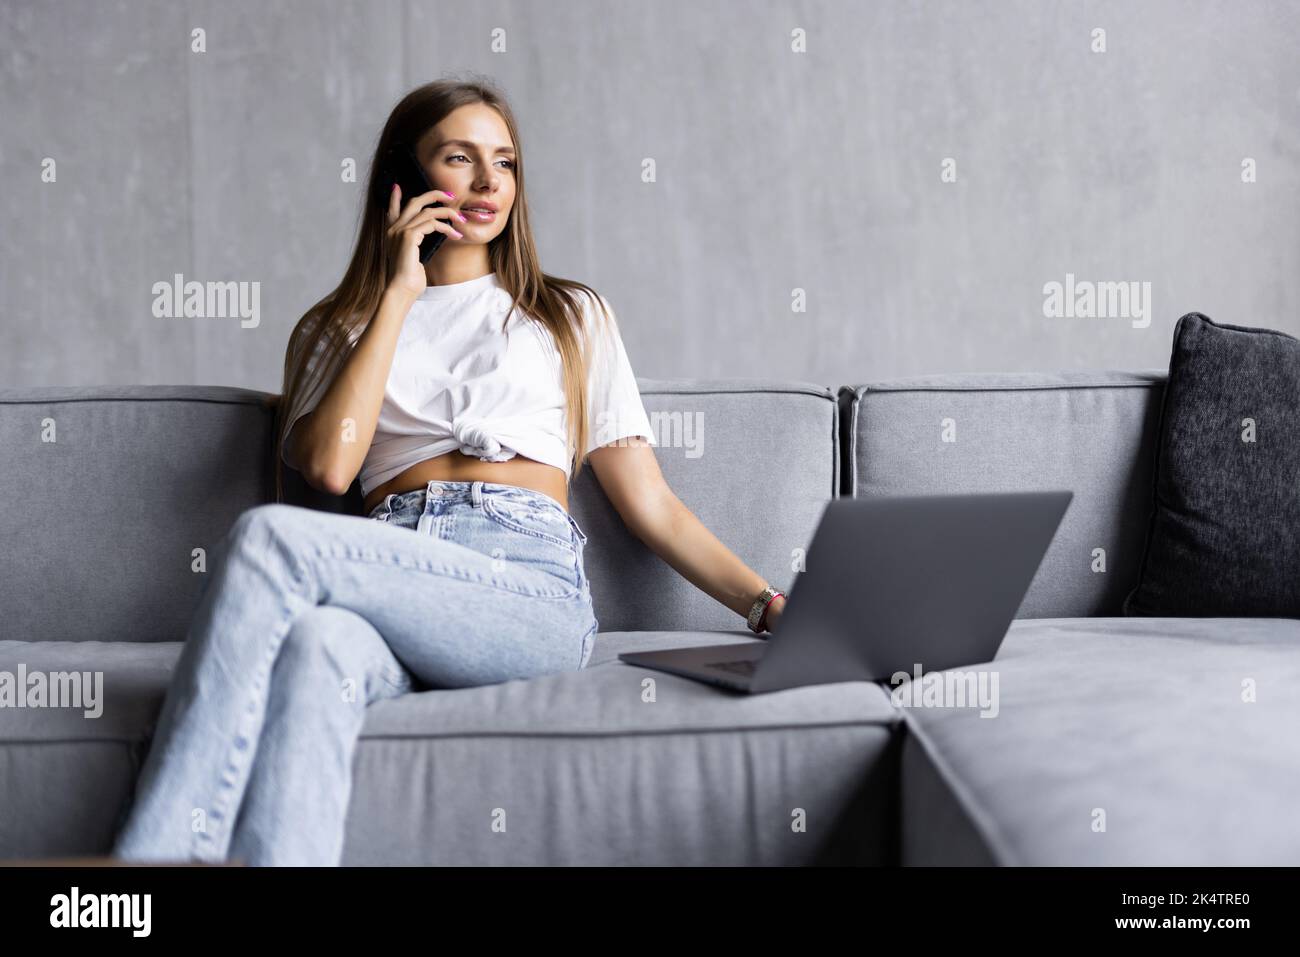 Casual young woman using laptop and cellphone on sofa at home Stock Photo